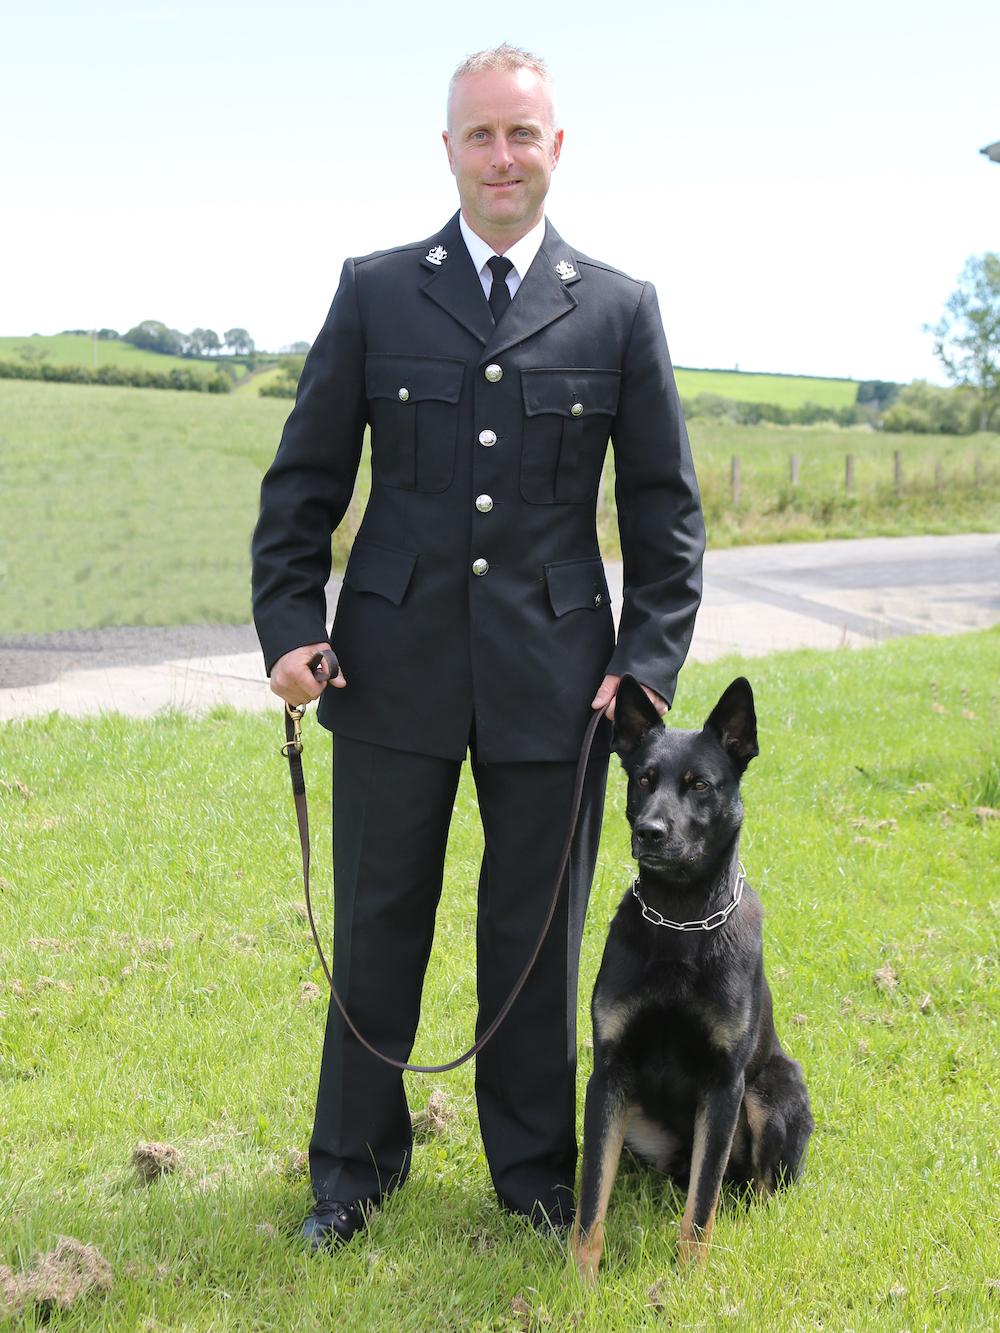 Police Constable Peter Lloyd pictured with his K-9, PD Max (<a href="https://www.dyfed-powys.police.uk/en/newsroom/press-releases/missing-mum-and-baby-found-after-night-outdoors-thanks-to-police-dog-on-his-first-shift/">Dyfed-Powys Police</a>)